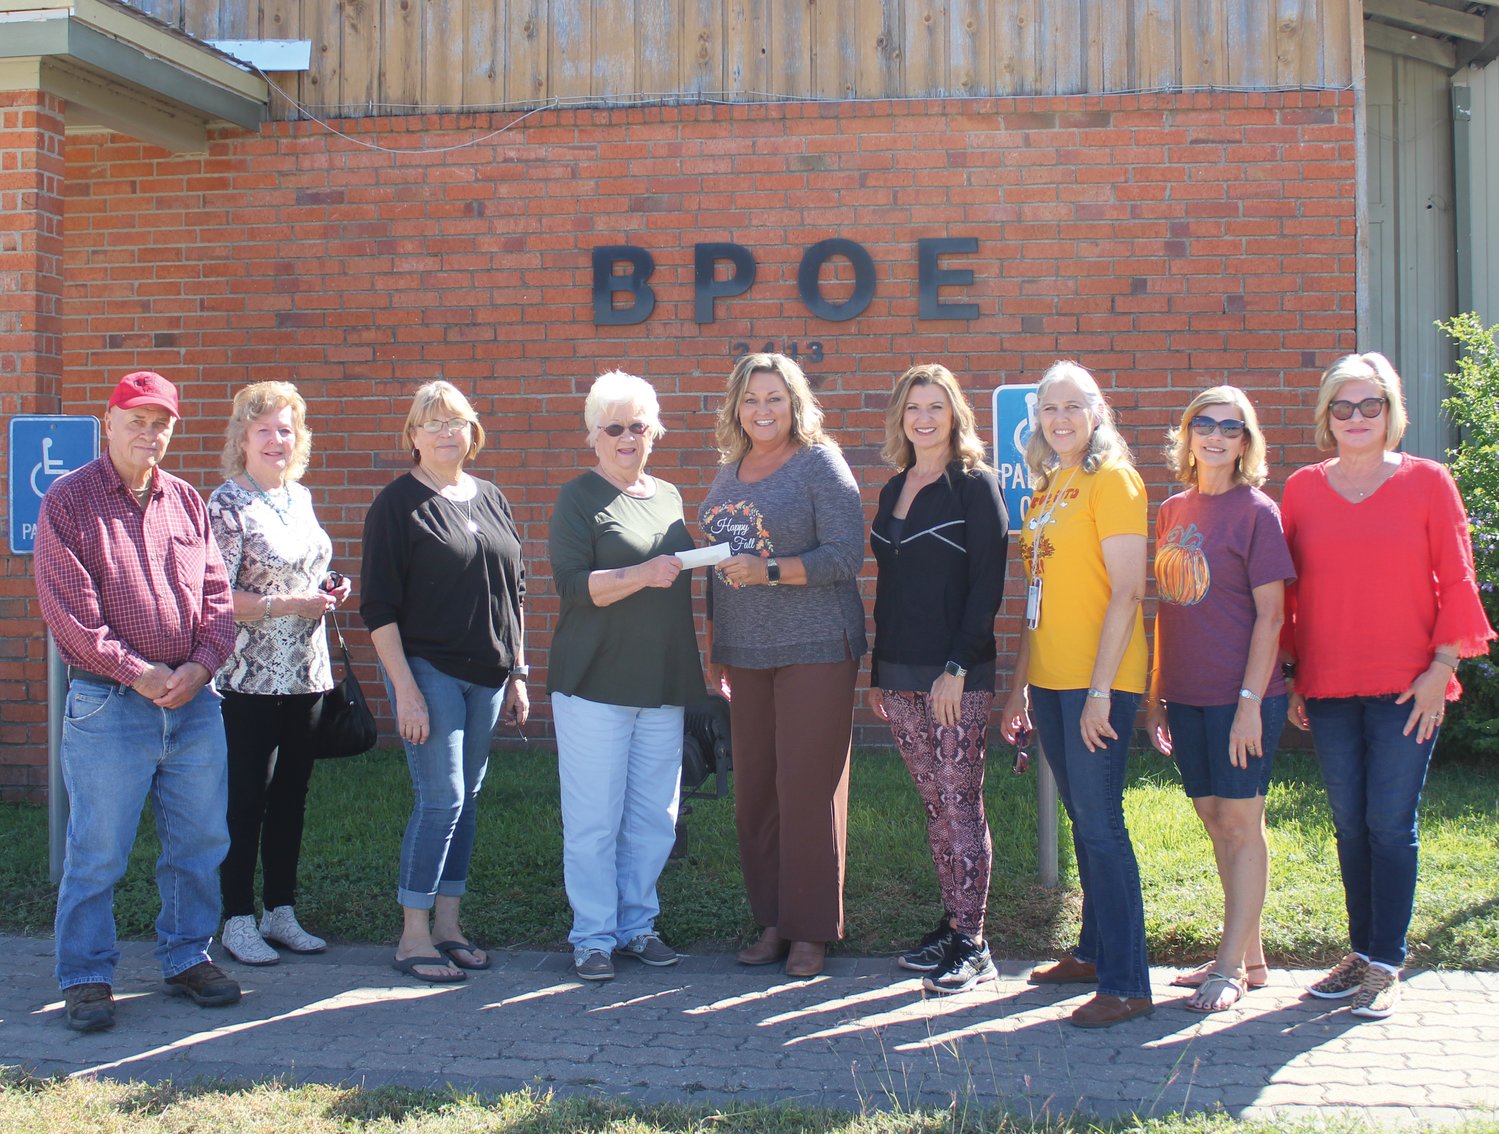 Joe Kotwig, Mary Ann Day, Lori Behlen and Shirley Breitschopf representing First Shot Cookoff-Elks are shown presenting a check for $1500 to go toward Foster Children’s Christmas Fund. Accepting check are Brenda Petru, Karen Fougerat, Noel Ince, Julie Bozcamp and Jean Burns.